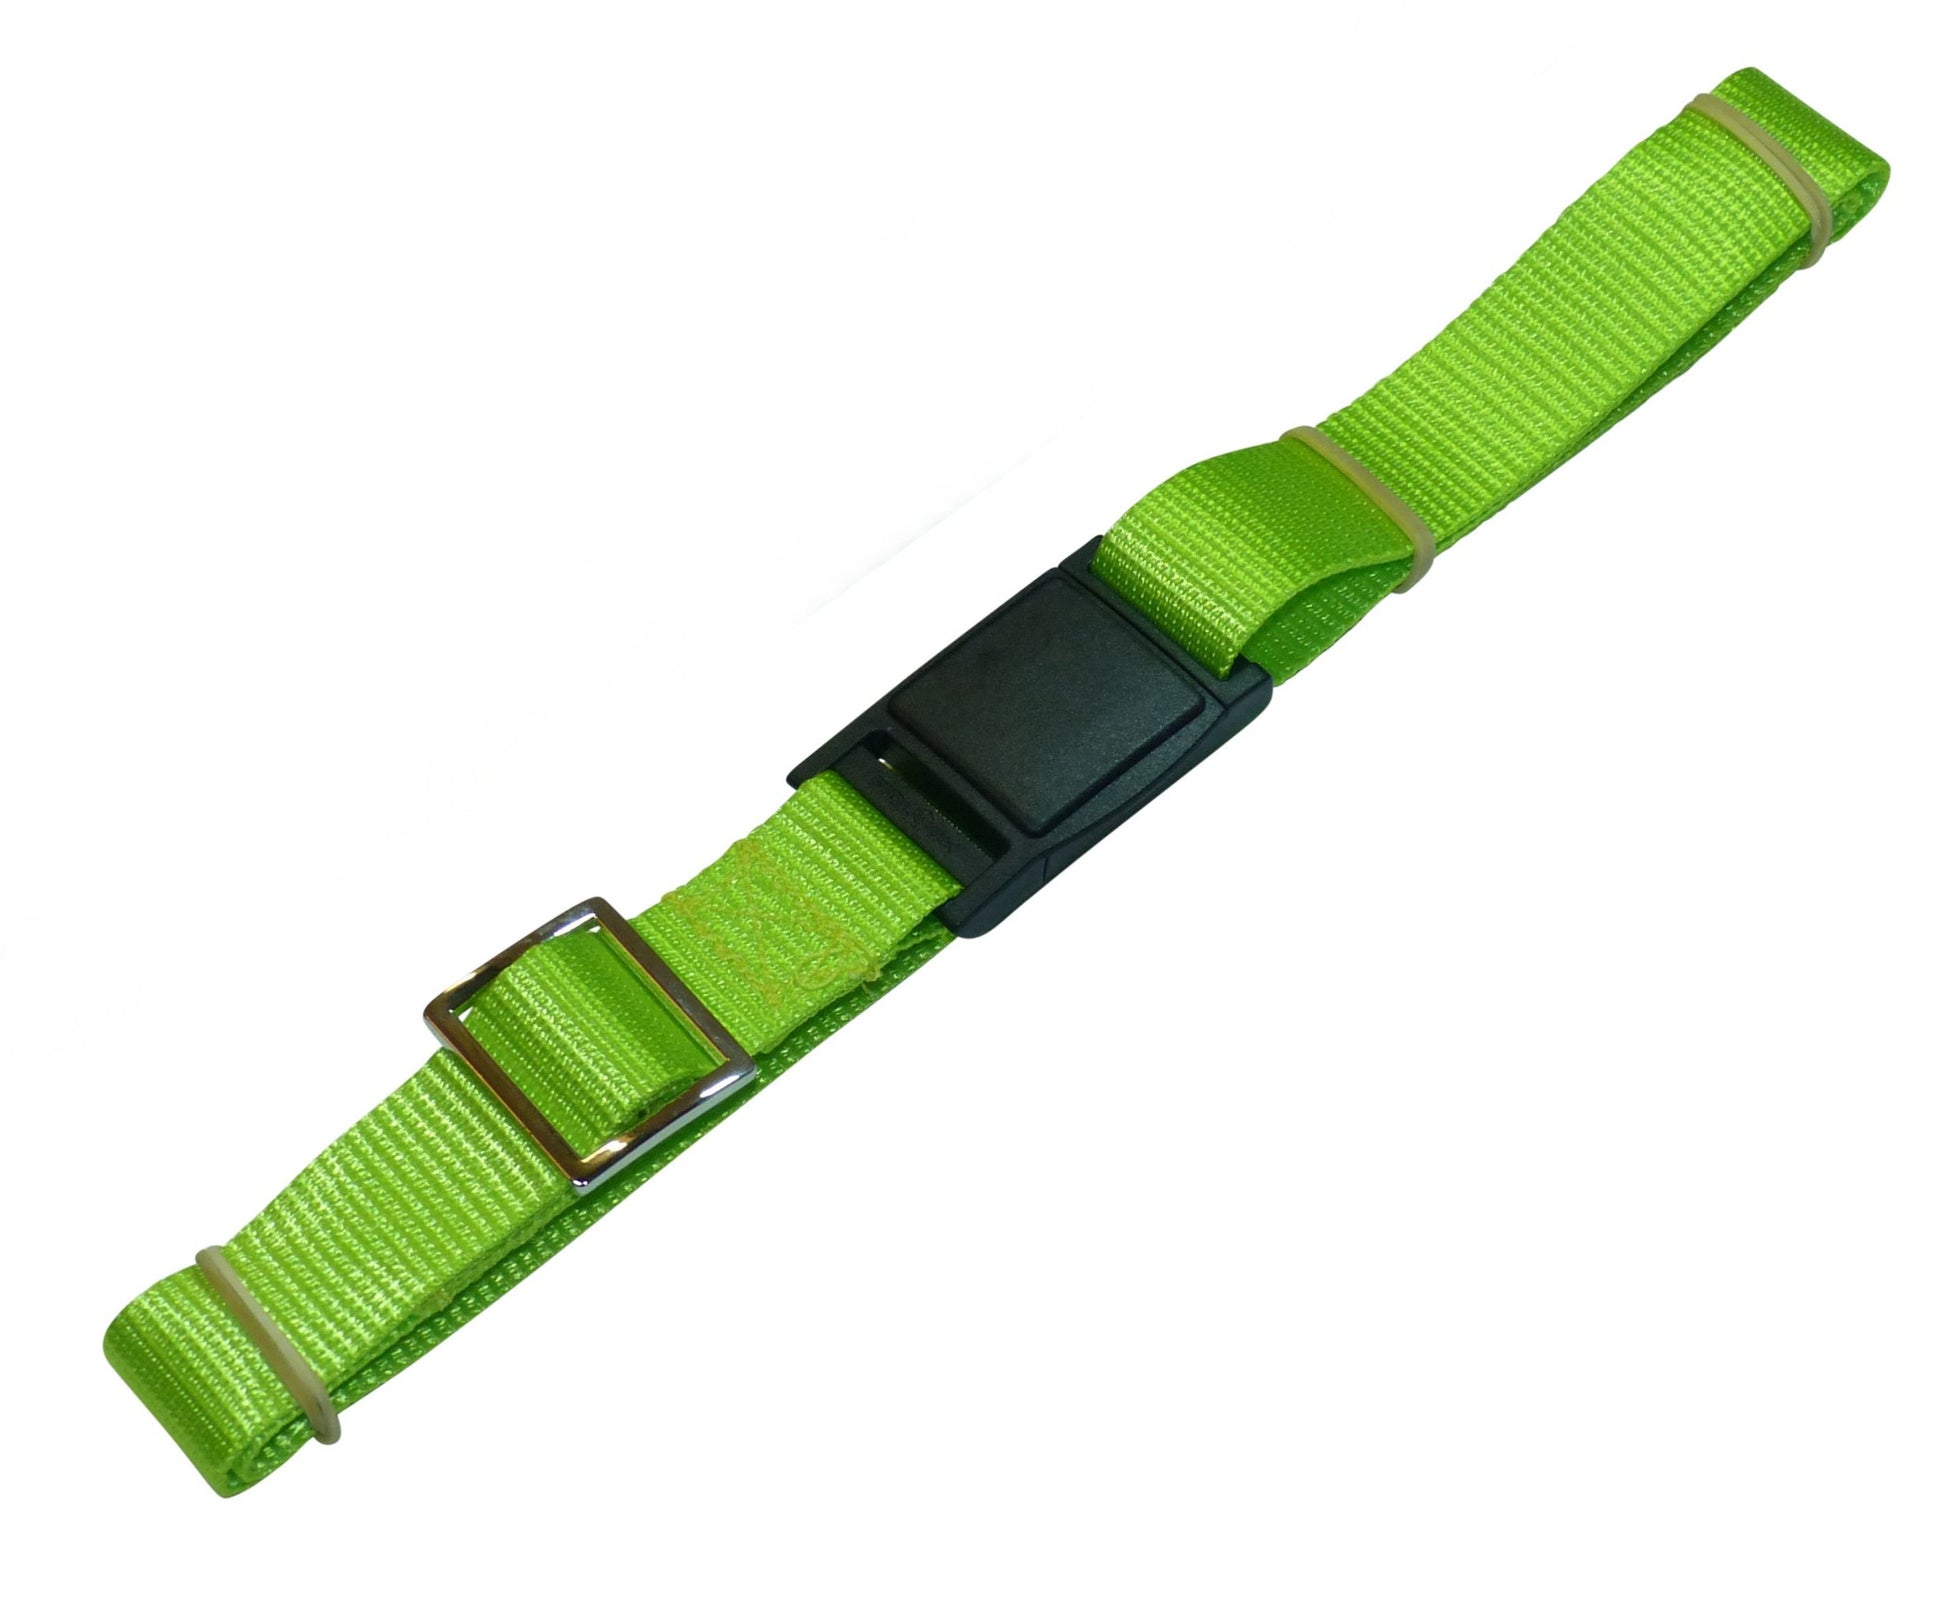 Benristraps 25mm Strap with Fidlock Quick Release & Length-Adjusting Buckles (Pair) in lime